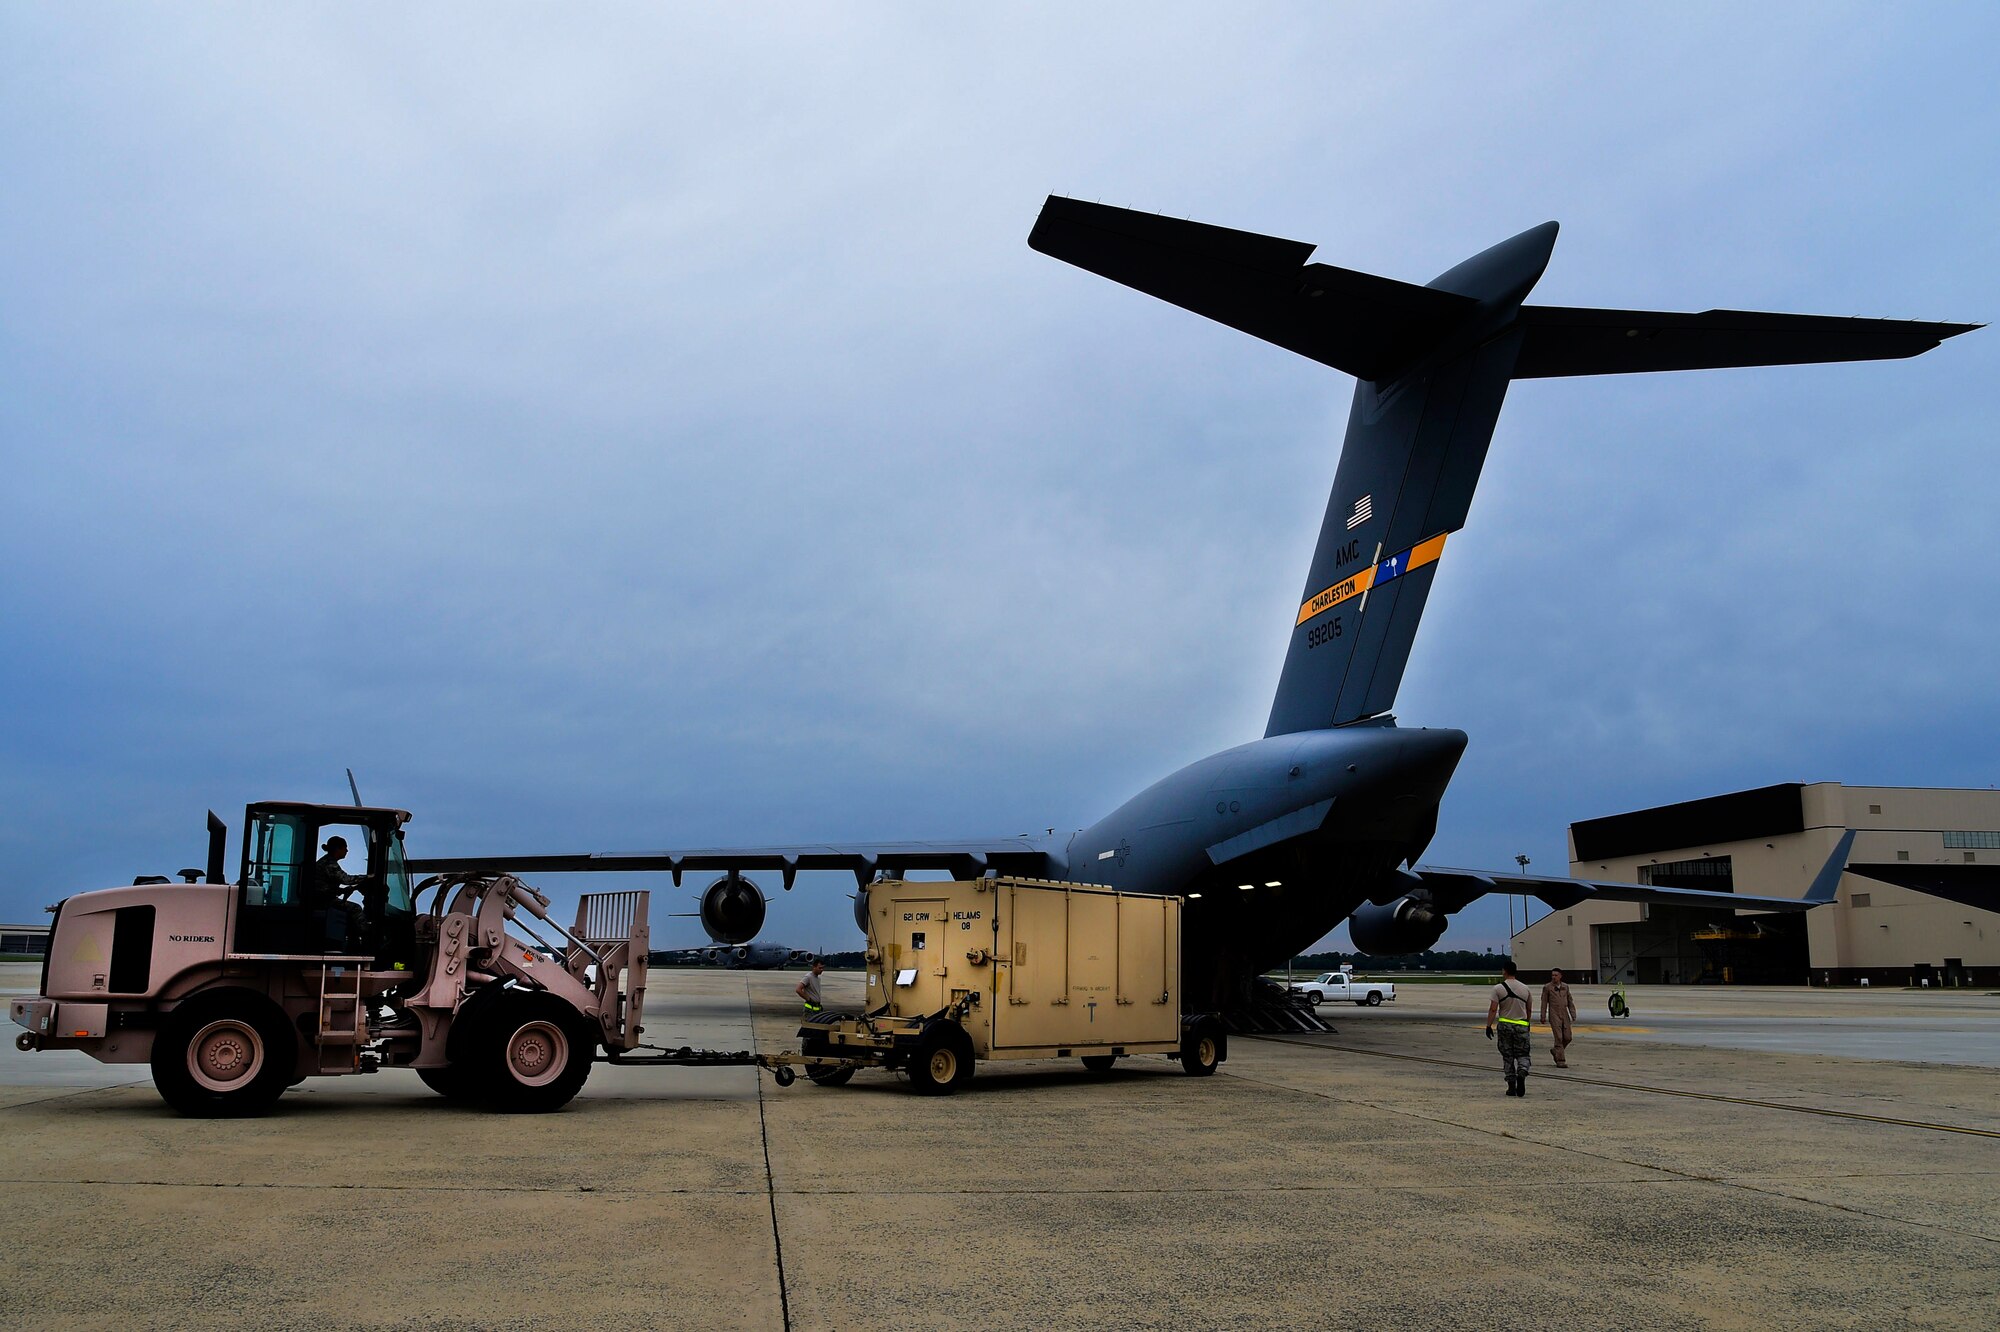 JOINT BASE MCGUIRE-DIX-LAKEHURST, N.J. - Airmen from the 621st Contingency Response Wing and 15th Airlift Squadron, assigned to Joint Base Charleston, N.C., load a CRW Hardside Expandable Light Air-Mobile Shelter (HELAMS) onto a Globemaster III C-17, also from JB Charleston, here, Sept. 29, 2014. The HELAMS will be used by the 621 CRW in West Africa in support of Operation UNITED ASSISTANCE in response to the Ebola virus disease outbreak. The CRW is highly-specialized in training and rapidly deploying personnel to quickly open airfields and establish, expand, sustain, and coordinate air mobility operations. From wartime taskings to disaster relief, the CRW extends Air Mobility Command's reach in deploying people and equipment around the globe. (U.S. Air Force photo by Staff Sgt. Gustavo Gonzalez/Released)